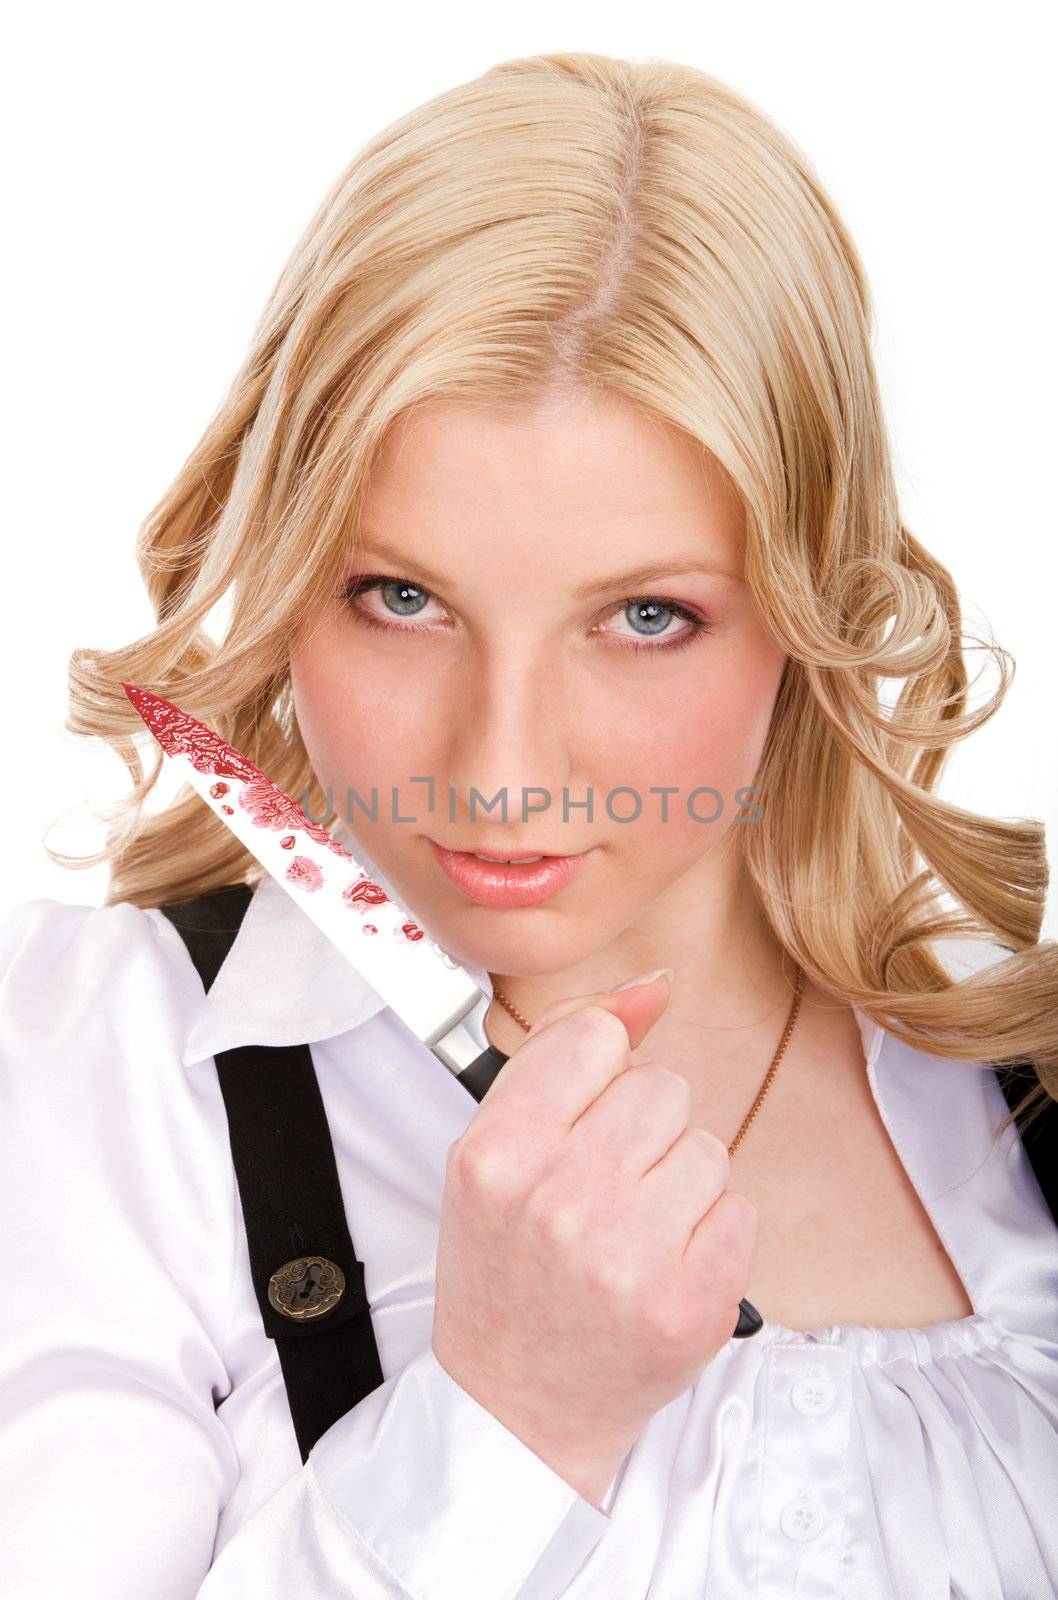 Young girl holding knife with blood on it on isolated white